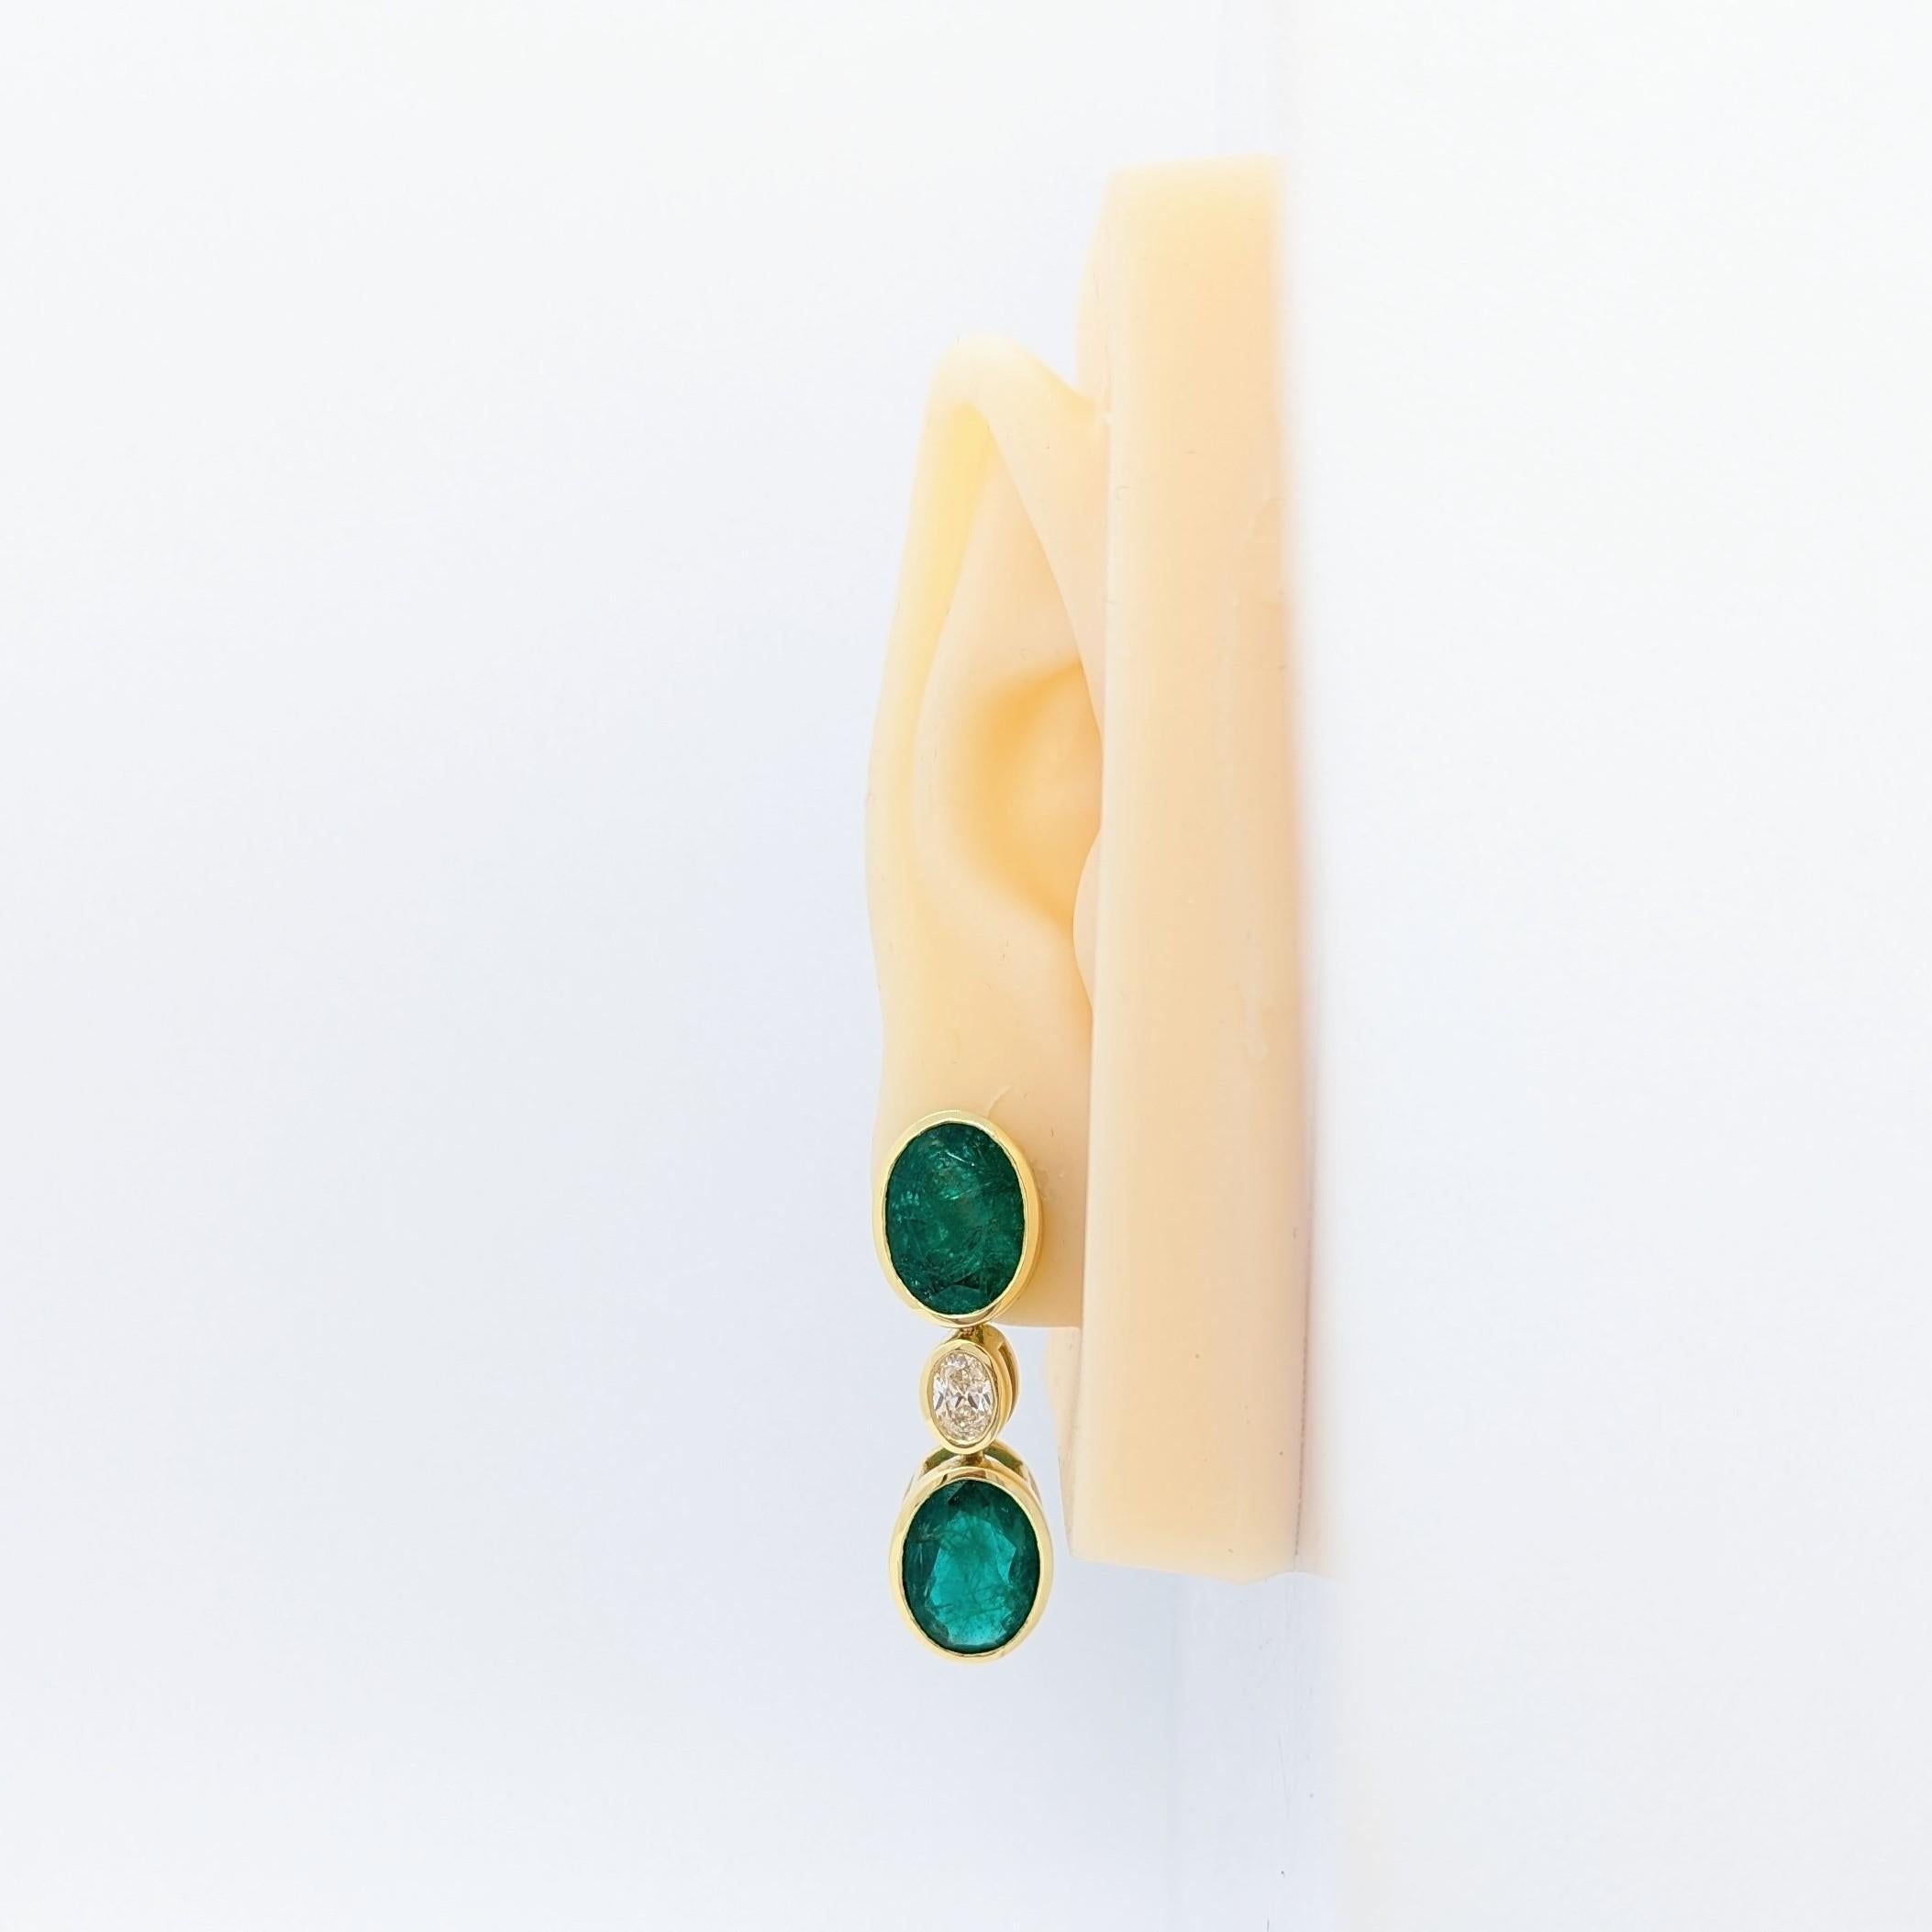 Gorgeous 20.92 ct. emerald ovals with 1.00 ct. H - I white diamond ovals.  Handmade in 18k yellow gold.  Push back setting.